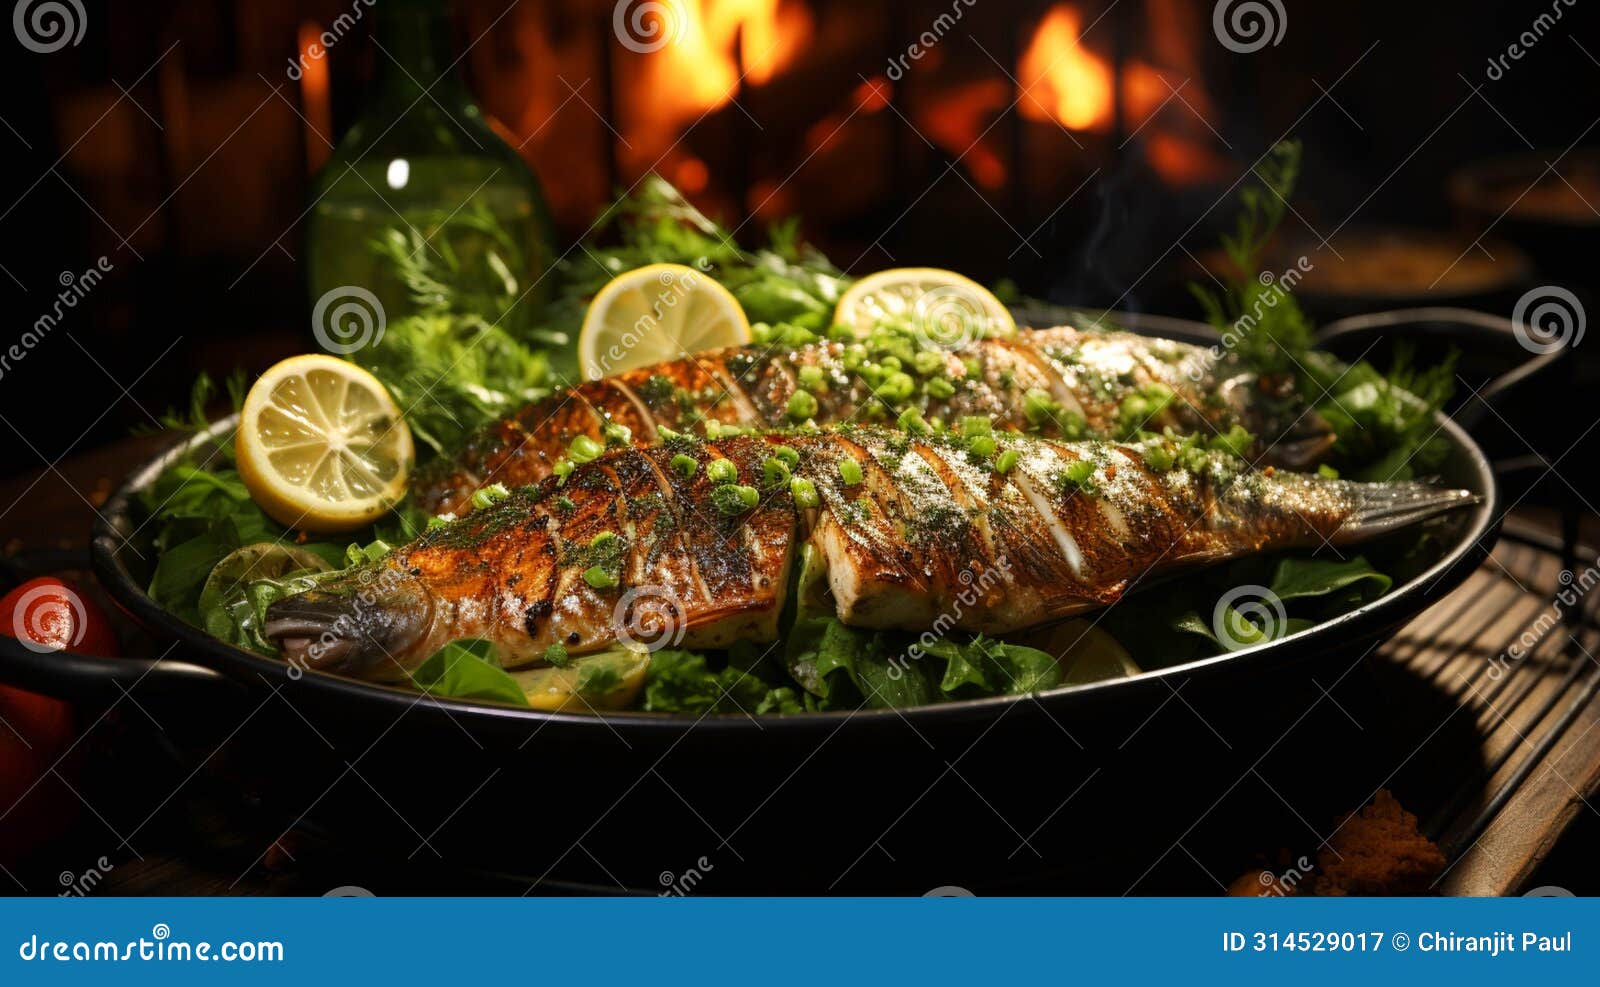 dorado grilled on a barbecue and charcoal in a plate on green color background